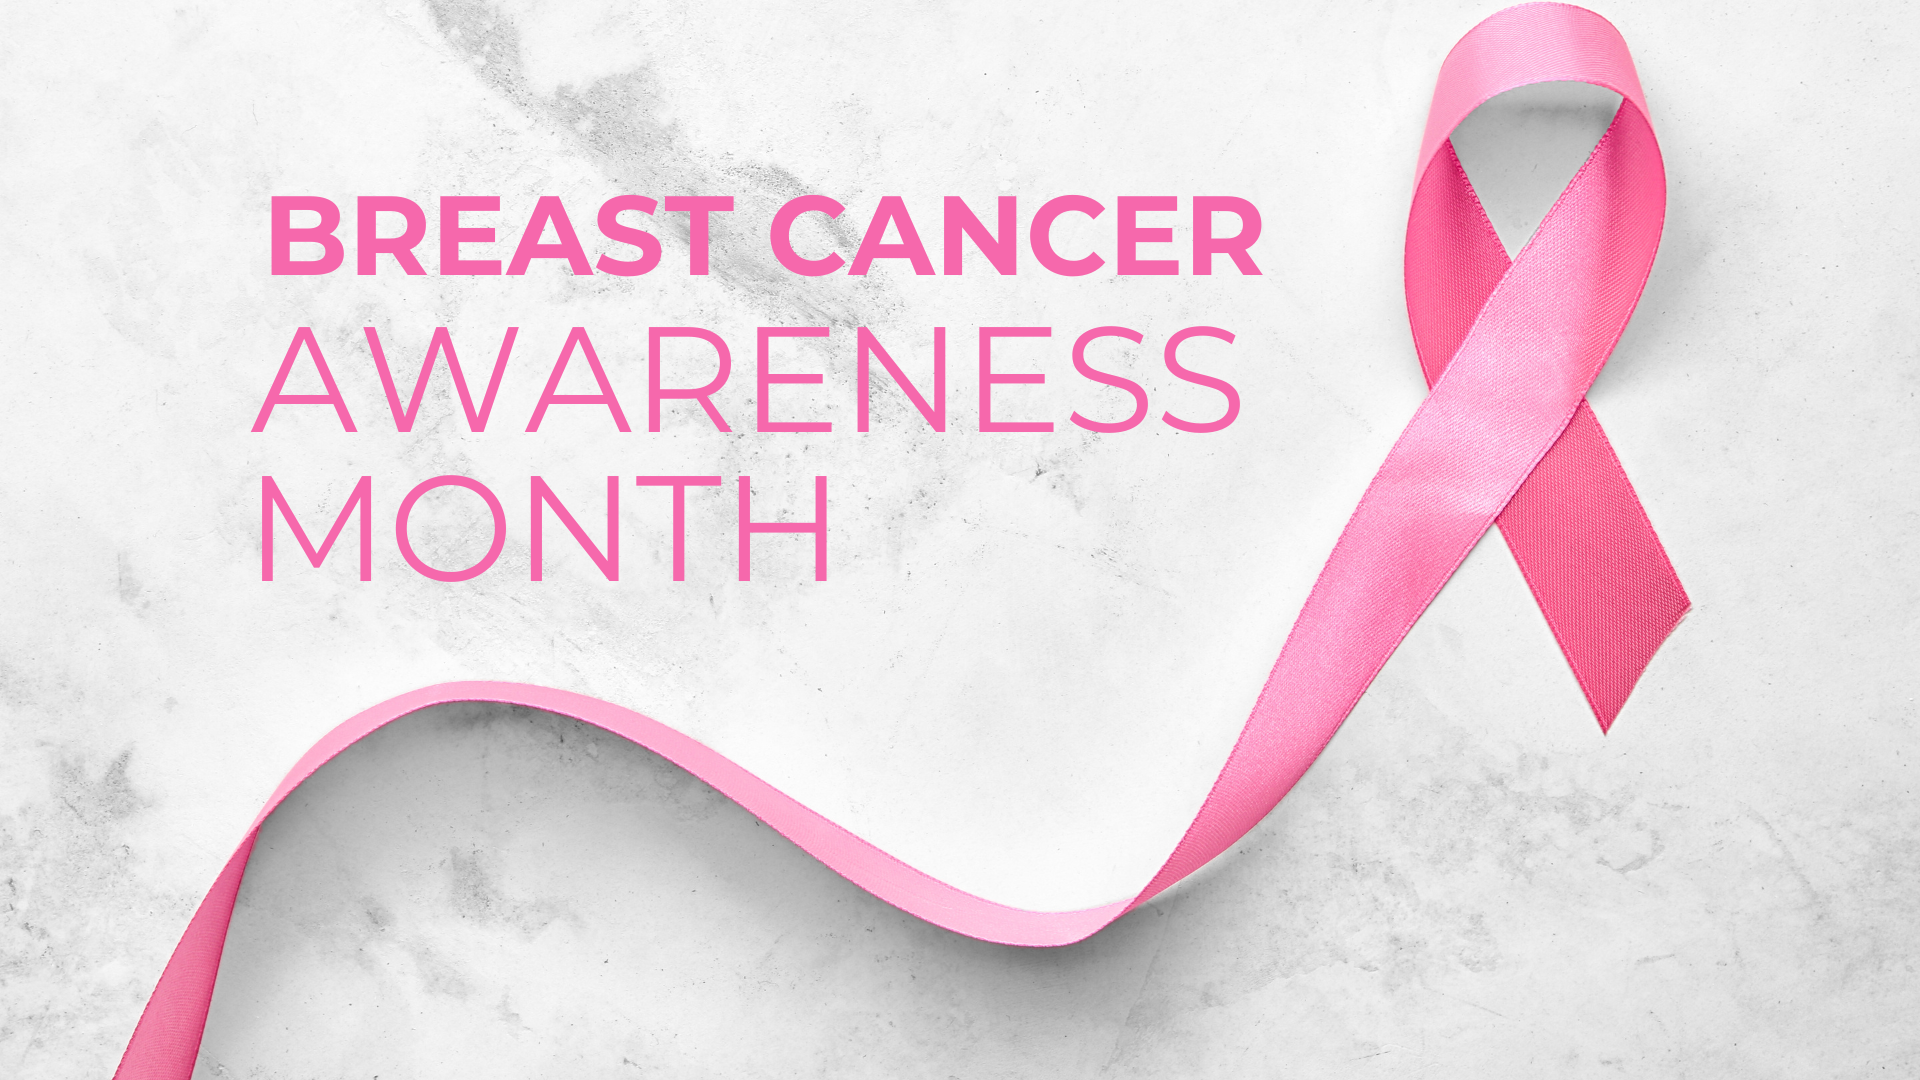 Breast Cancer Awareness Month: The Importance of the ‘Self-Check’